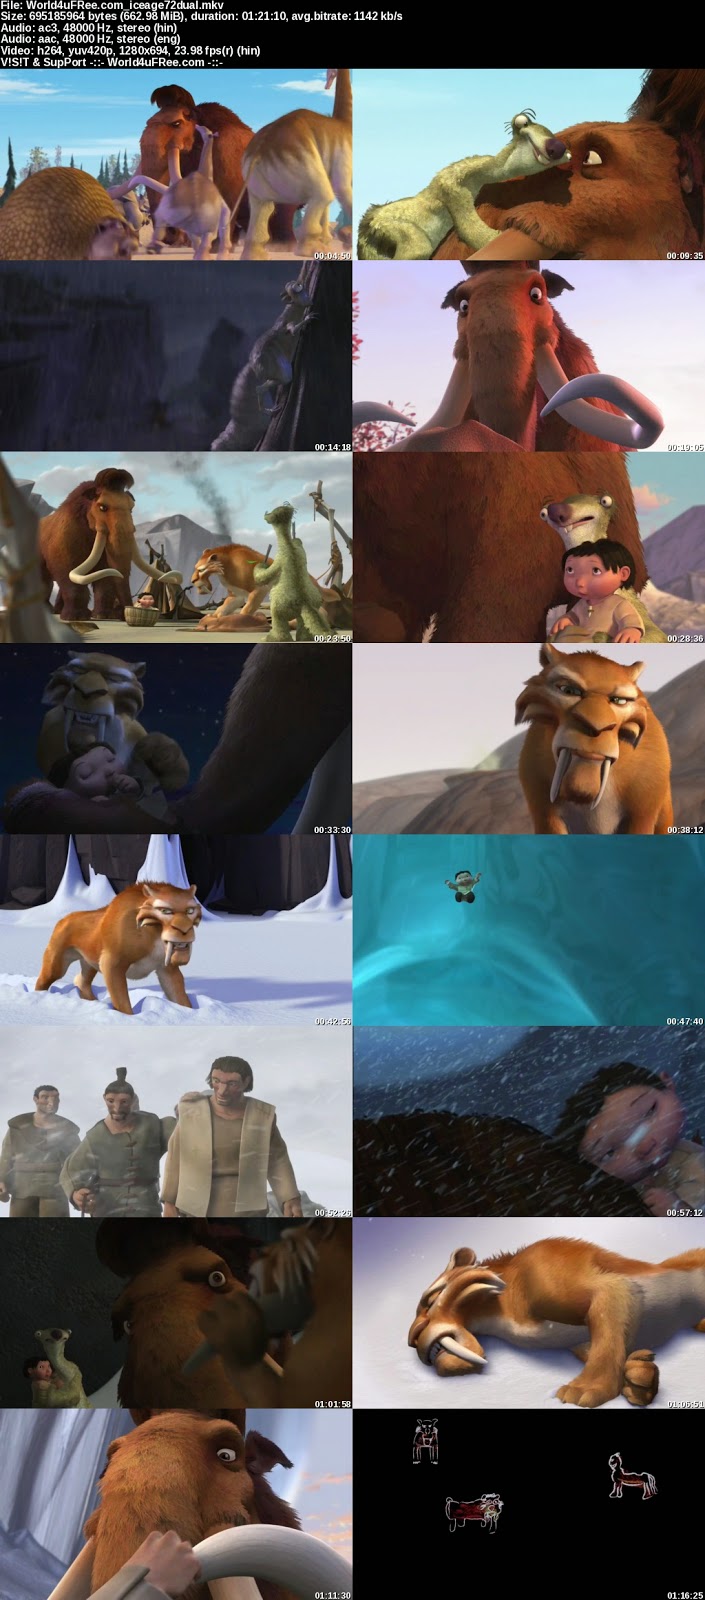 ice age 1 full movie in tamil hd free download